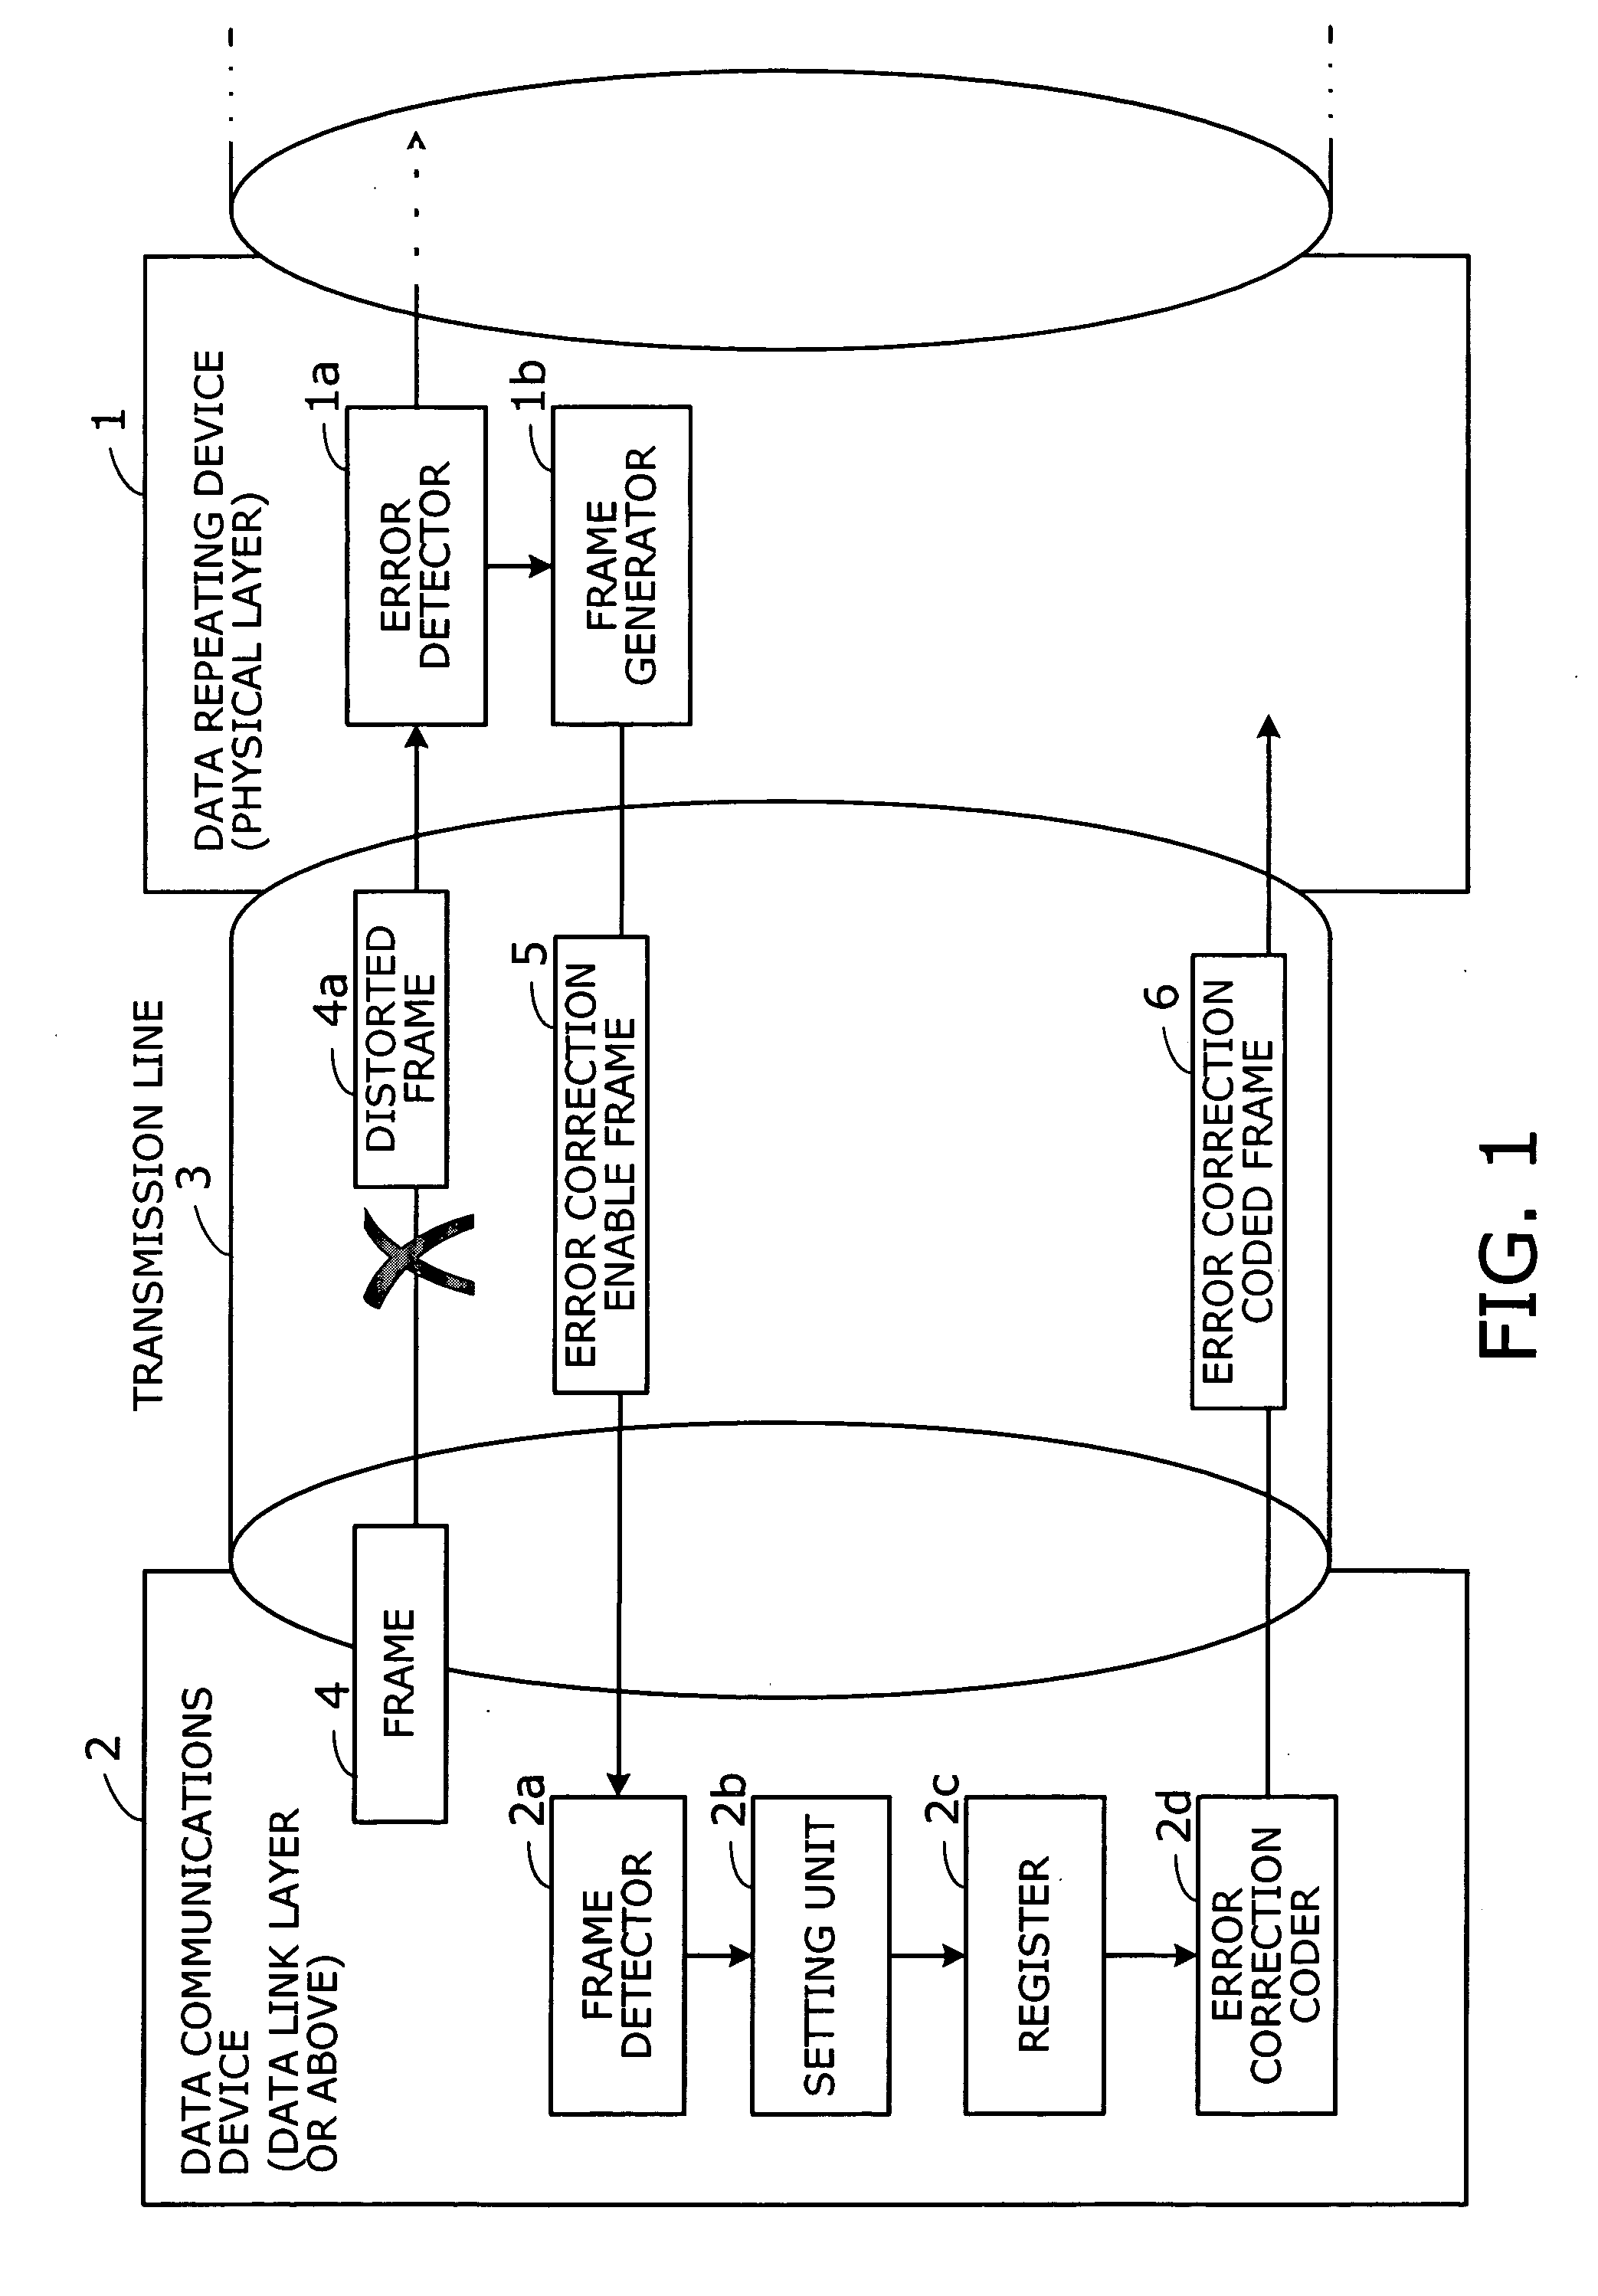 Data repeating device and data communications system with adaptive error correction